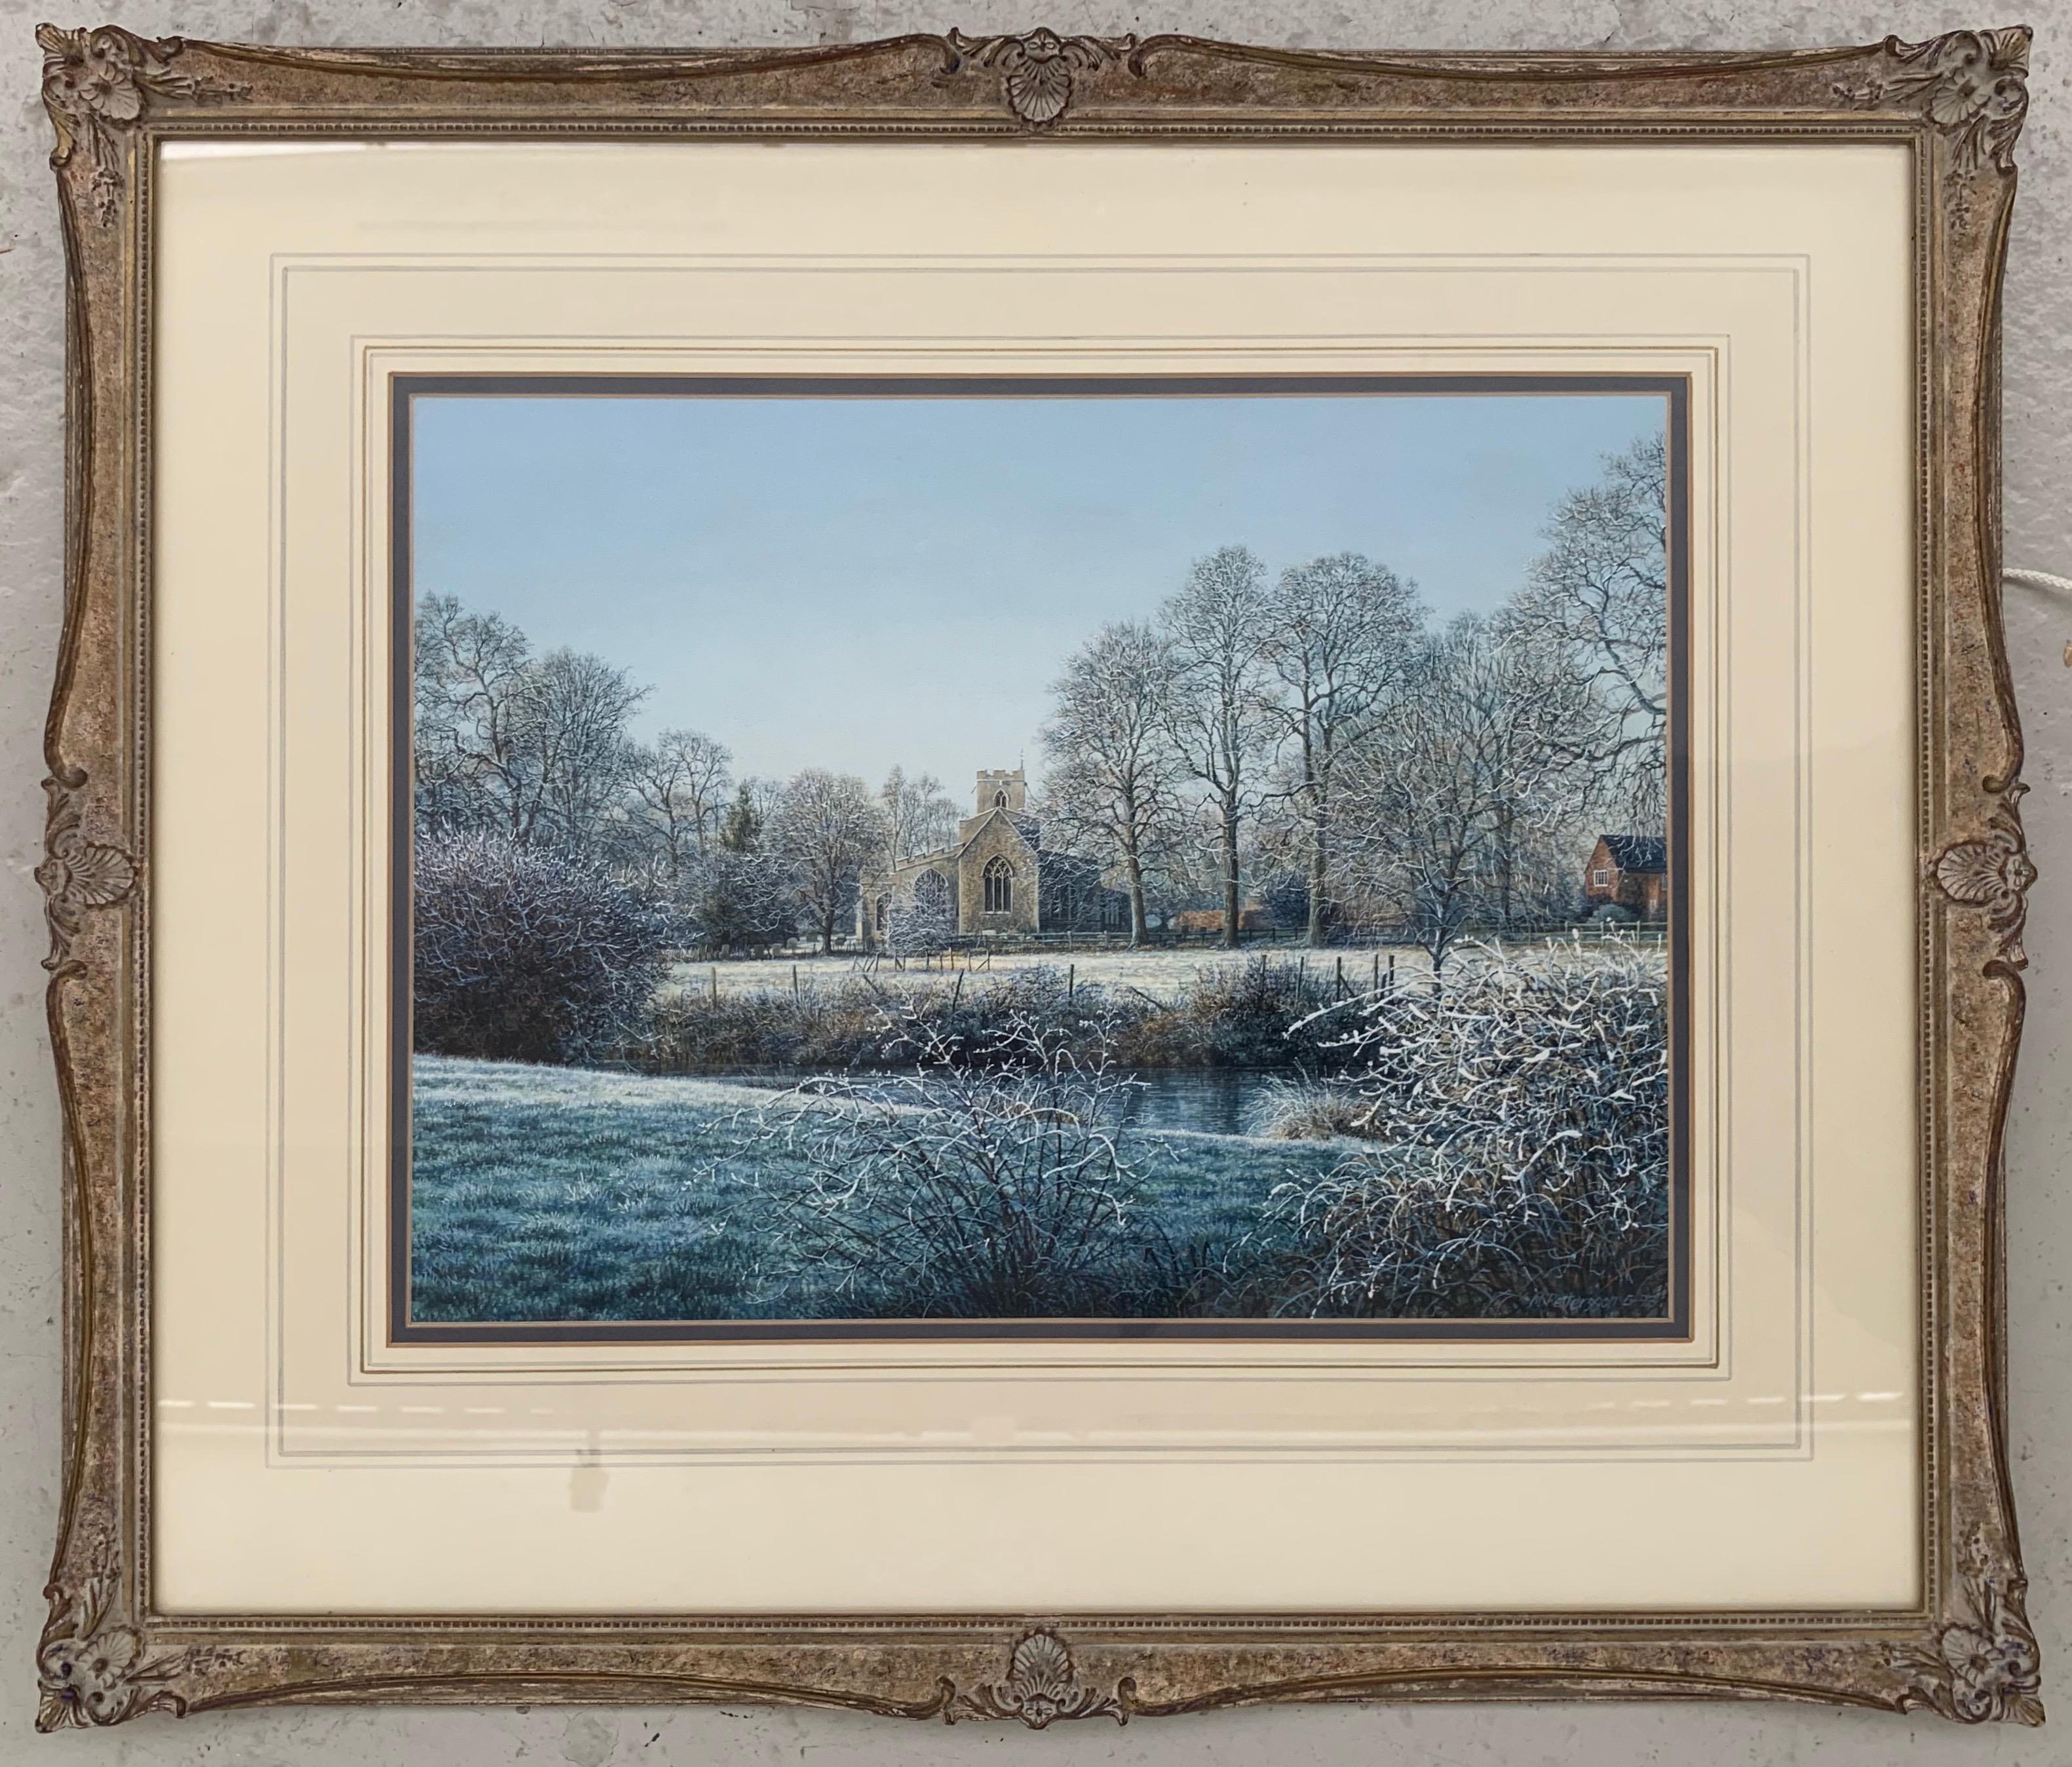 Winter Landscape Watercolour with Trees, River & Church by Modern British Artist 2